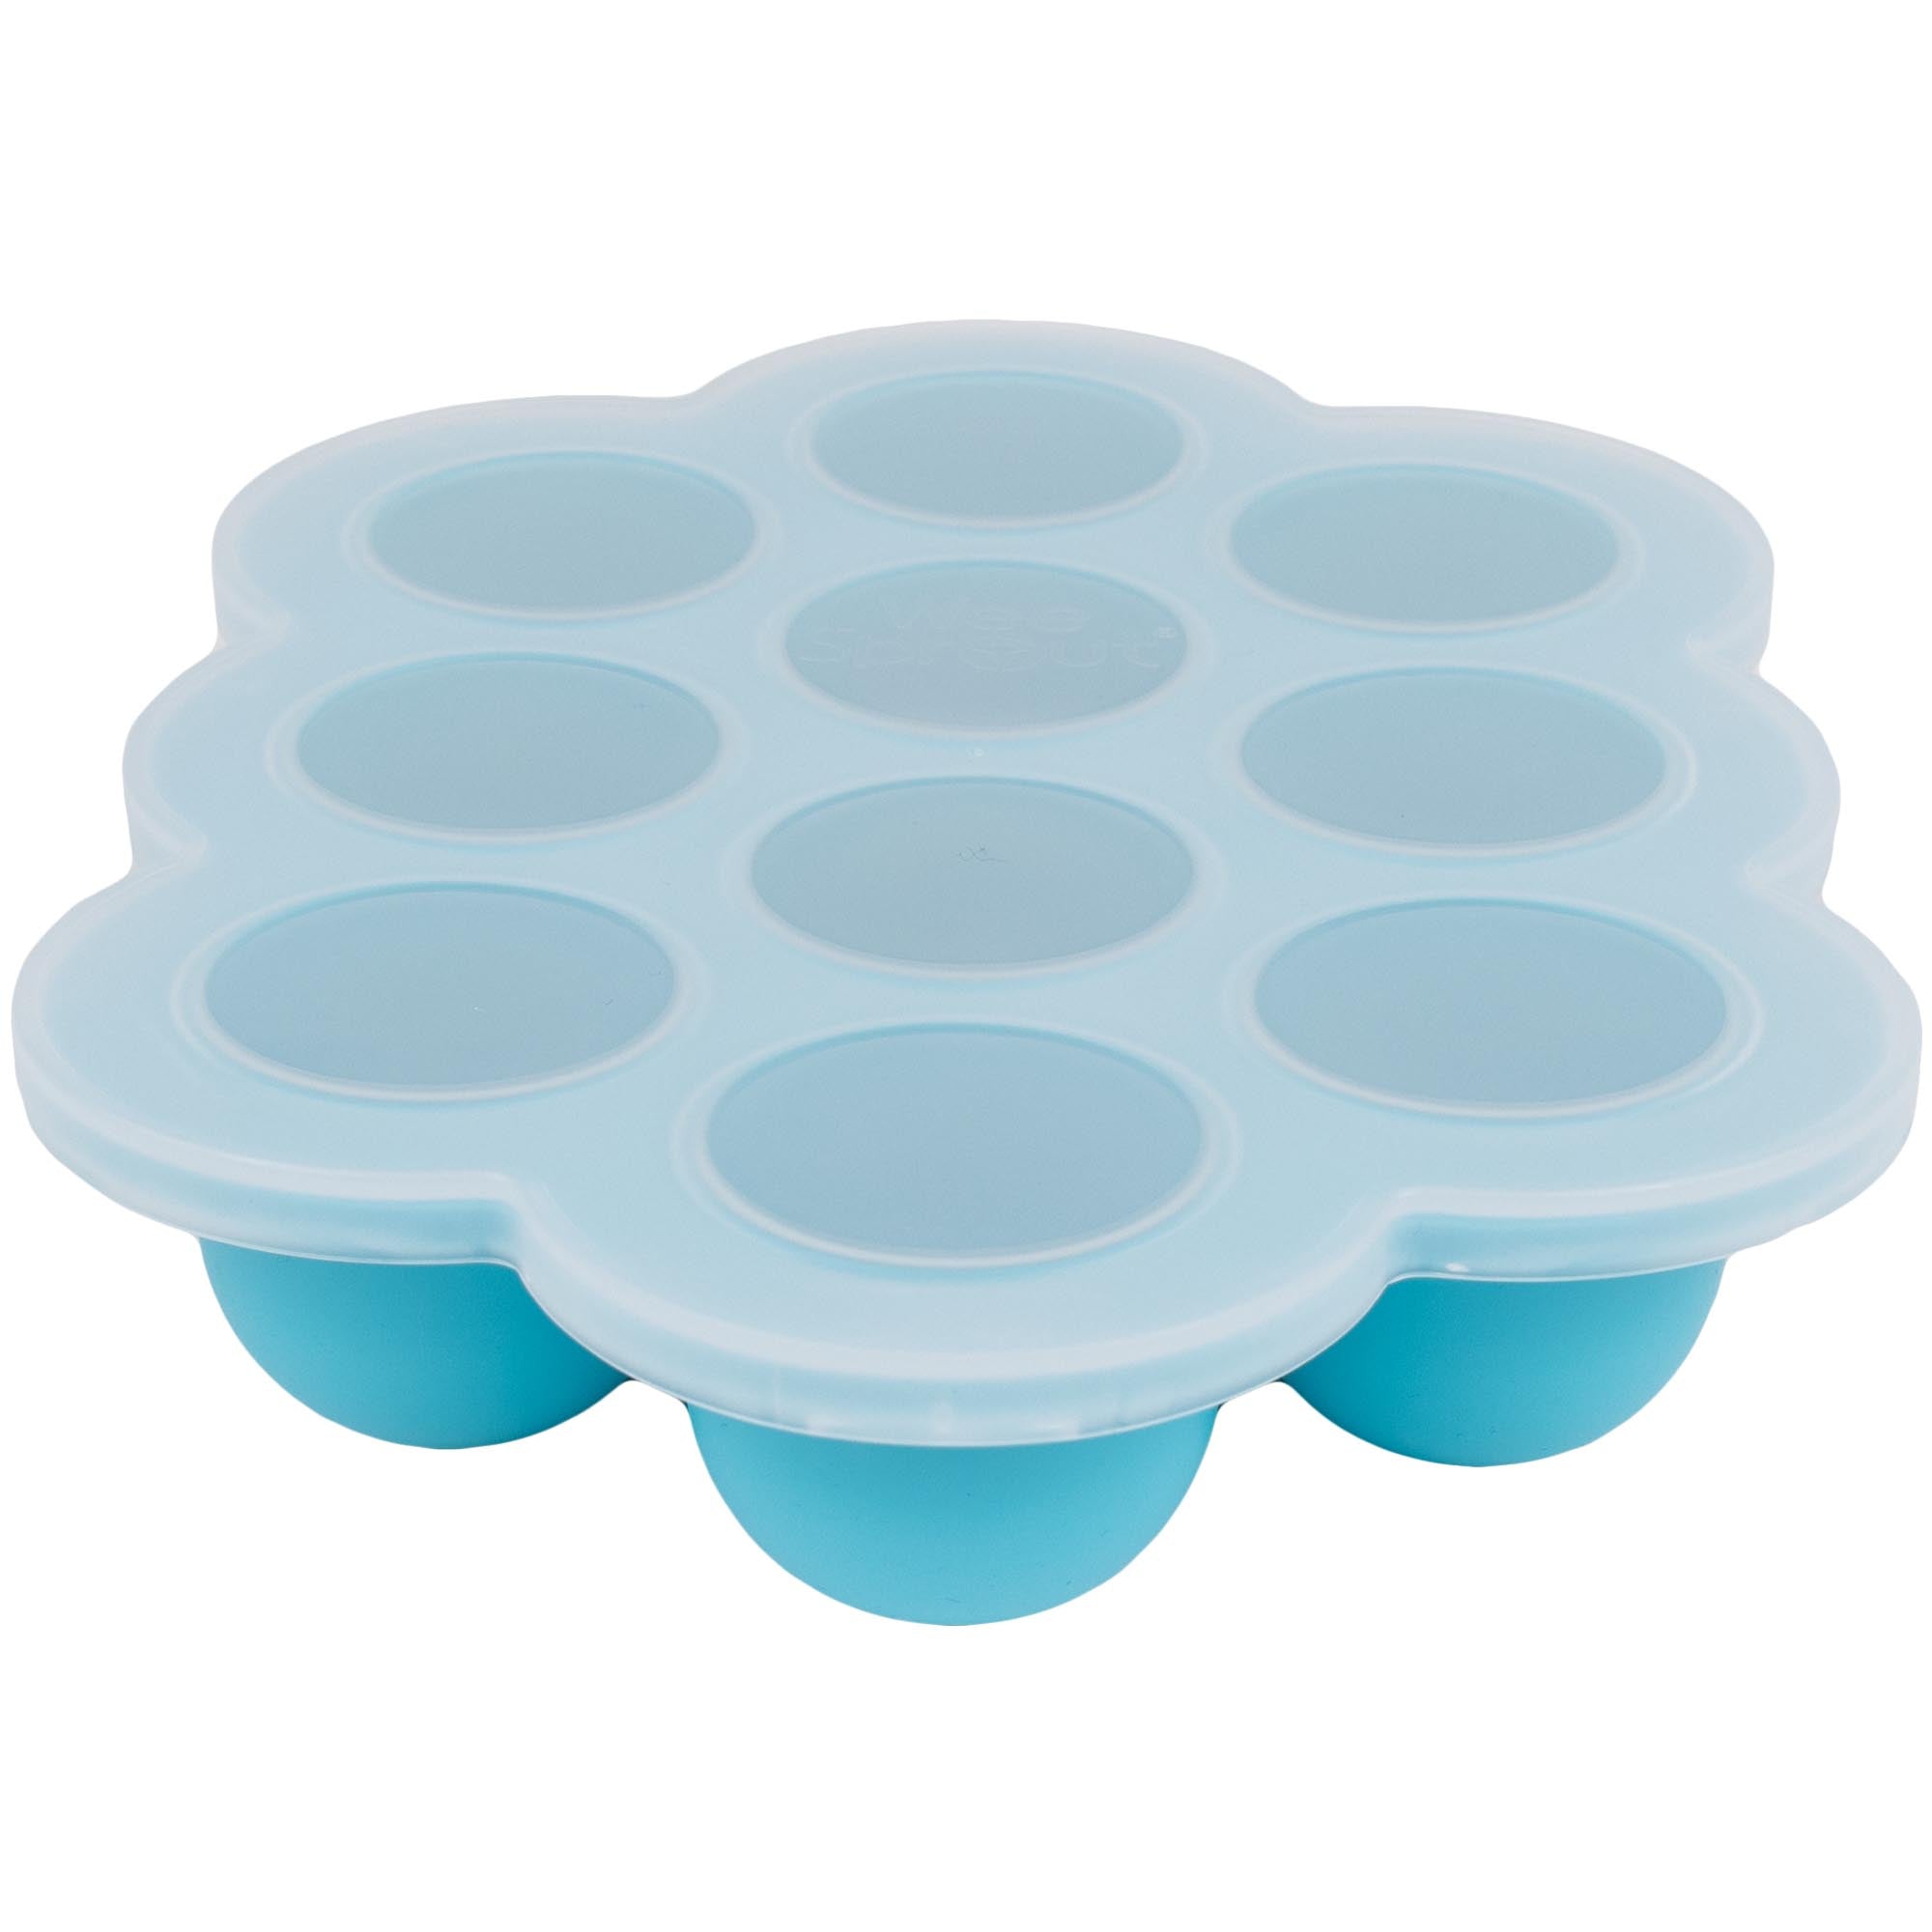 Sohindel Silicone Ice Trays for Freezer,Tiny Little Ice Cube Trays for Iced Coffee,Baby Food,BPA Free,Easy to Remove - Blue